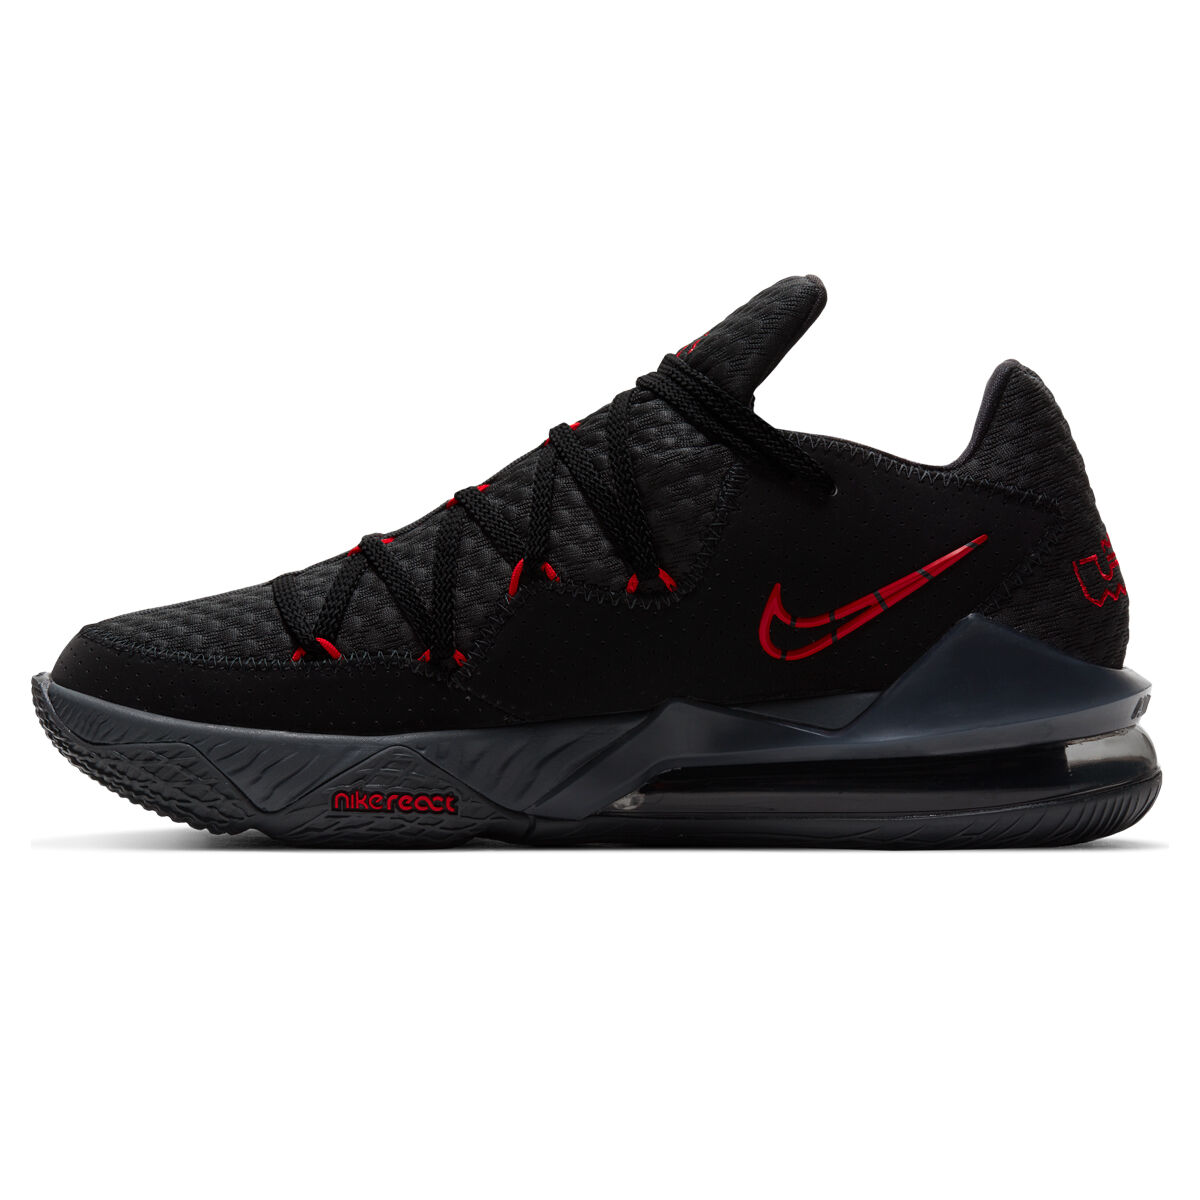 lebron shoes black red